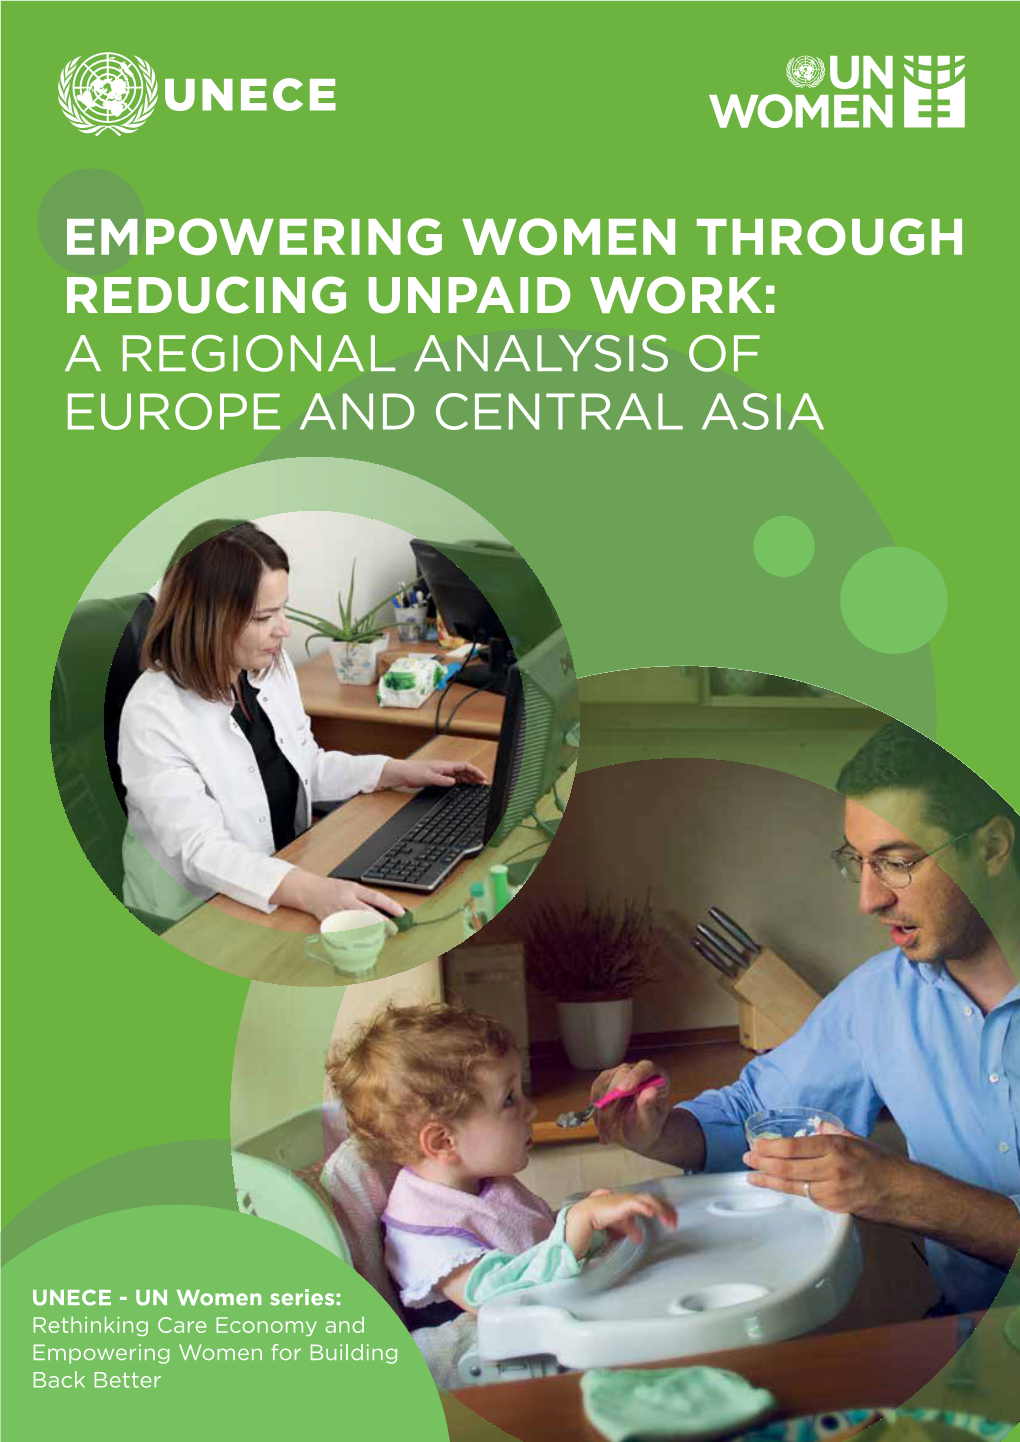 Empowering Women Through Reducing Unpaid Work: a Regional Analysis of Europe and Central Asia